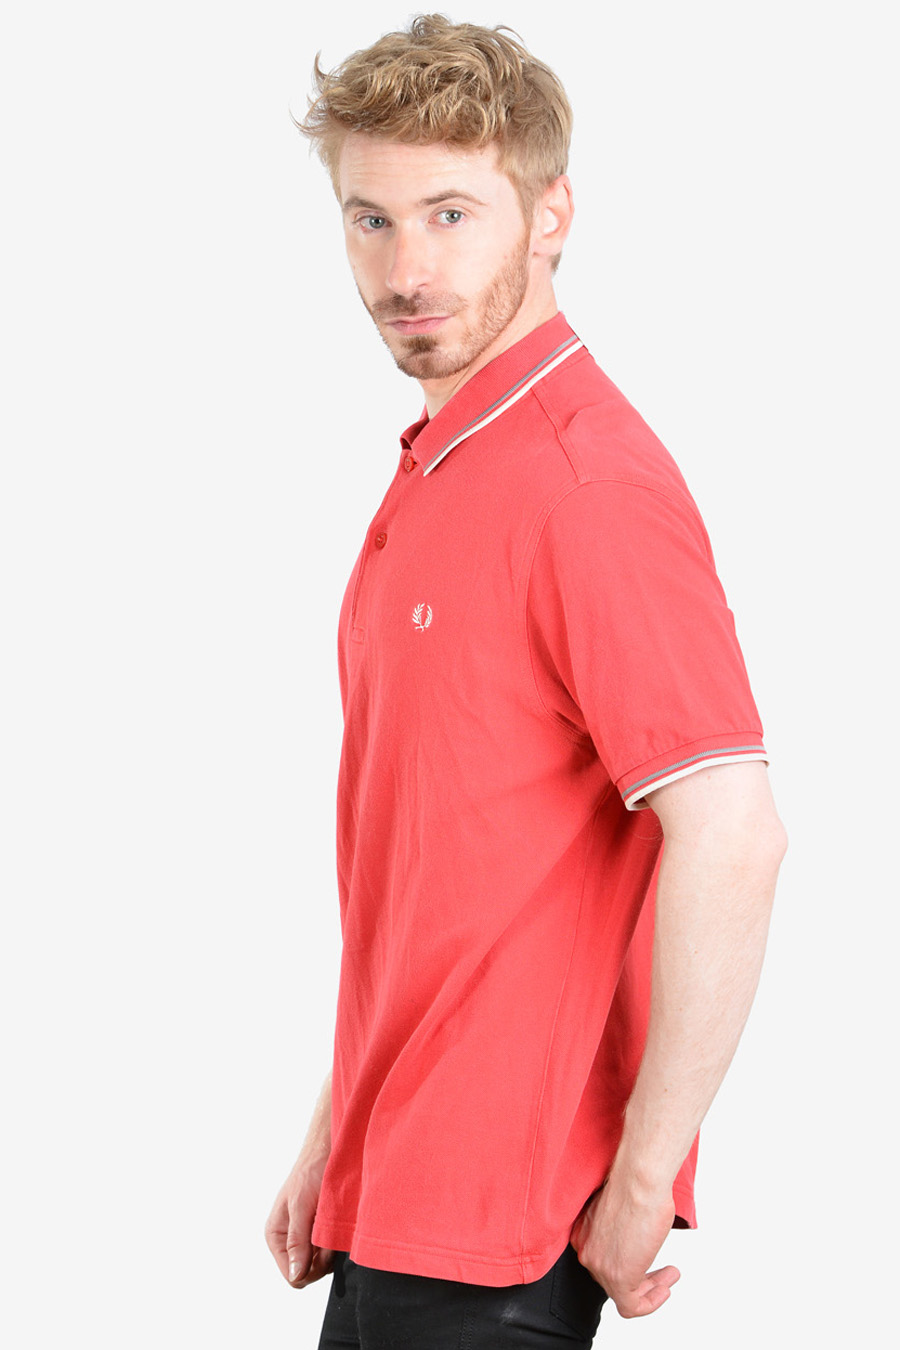 Vintage Fred  Perry  Red Polo Shirt Size S  Brick Vintage